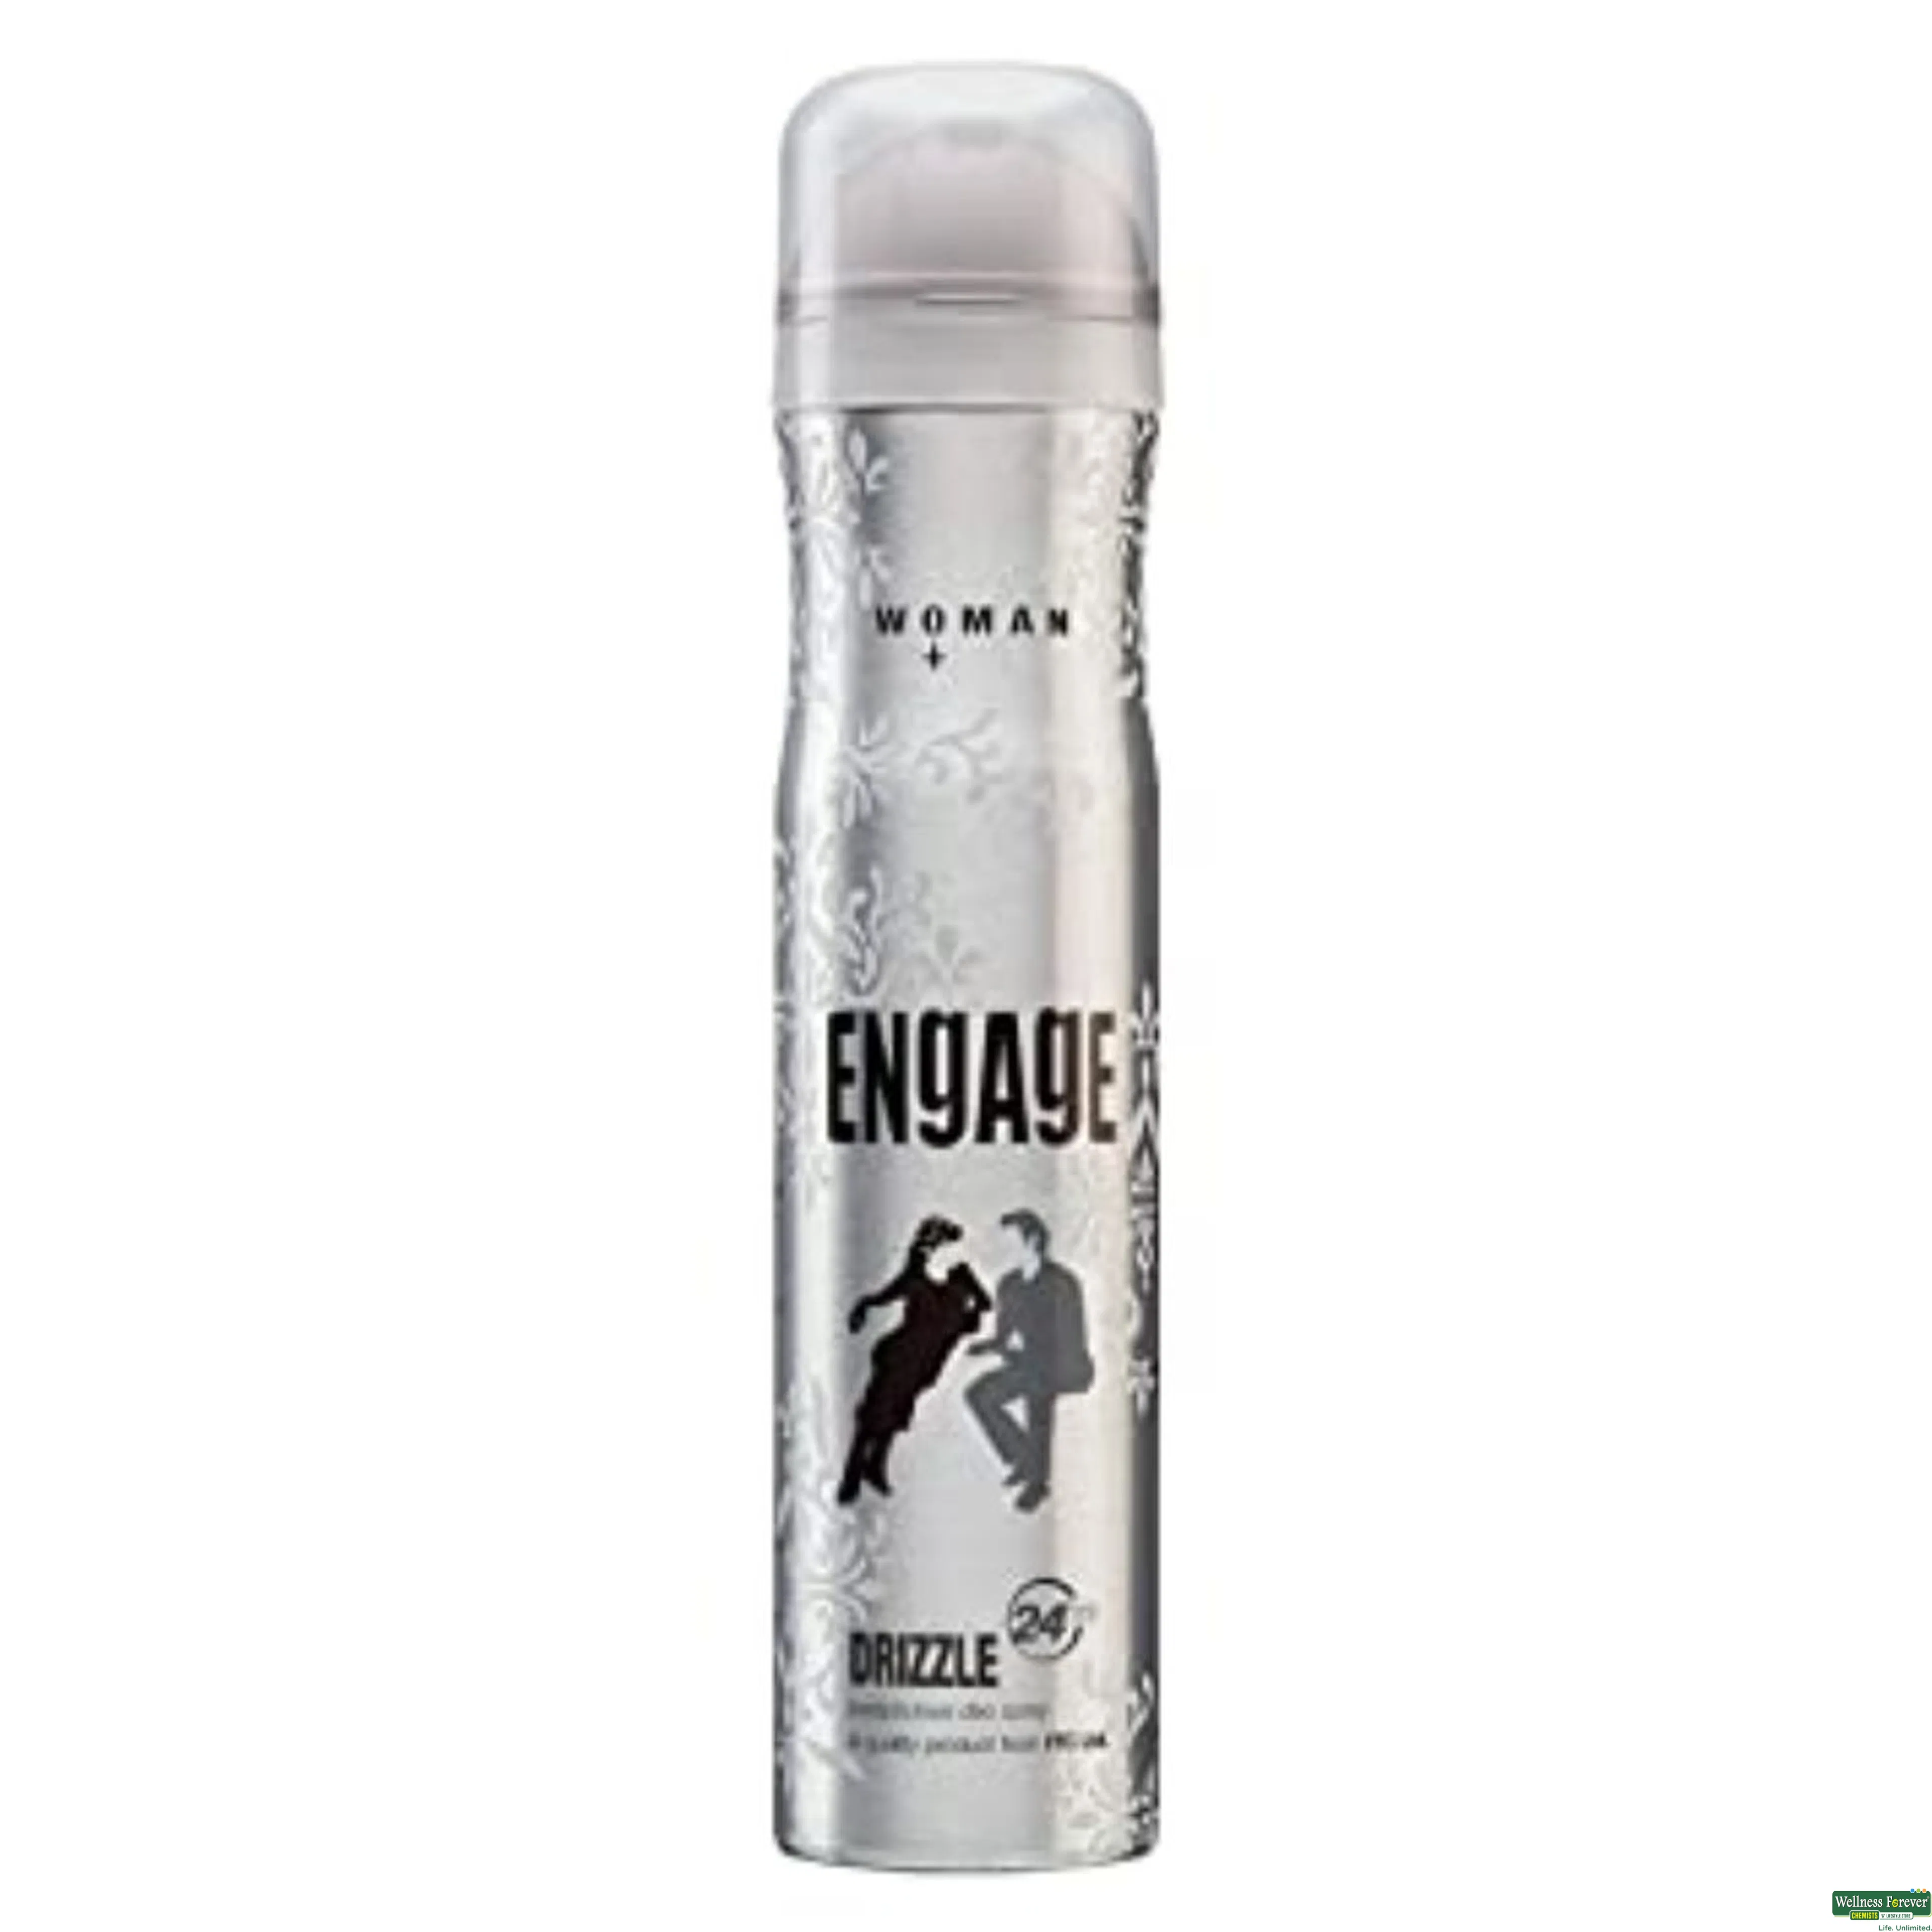 ENGAGE DEO DRIZZLE 150ML-image